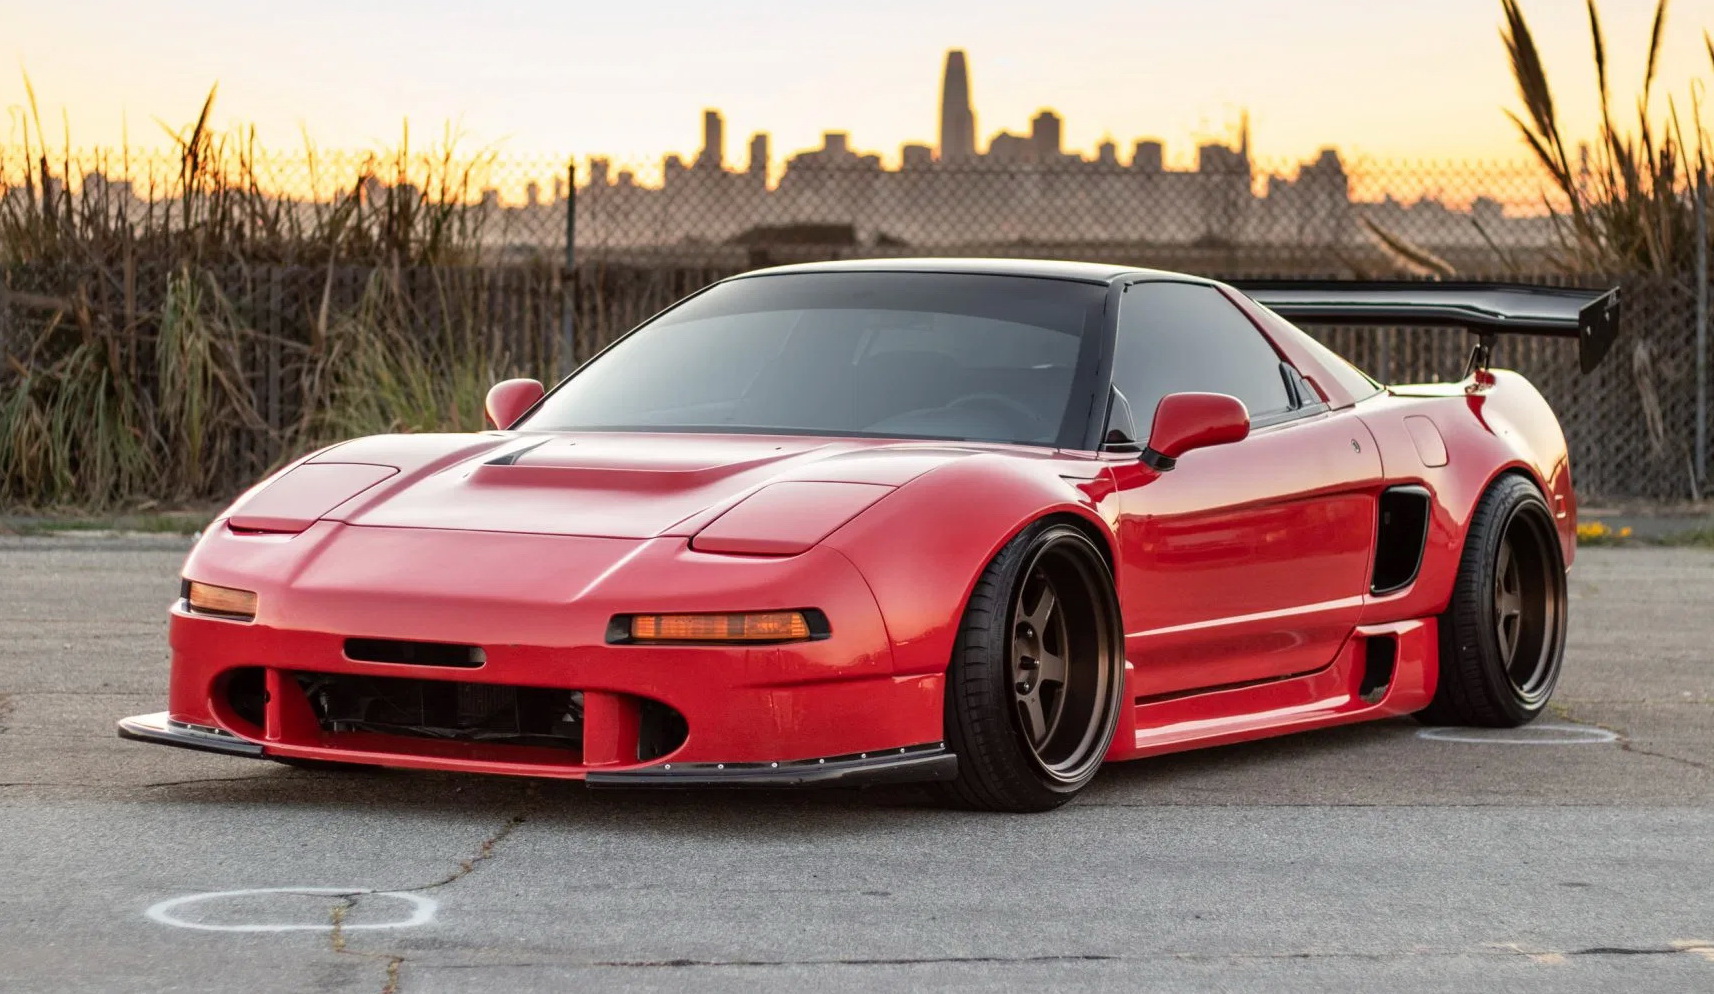 Widebody 1991 Acura NSX getting auctioned off.